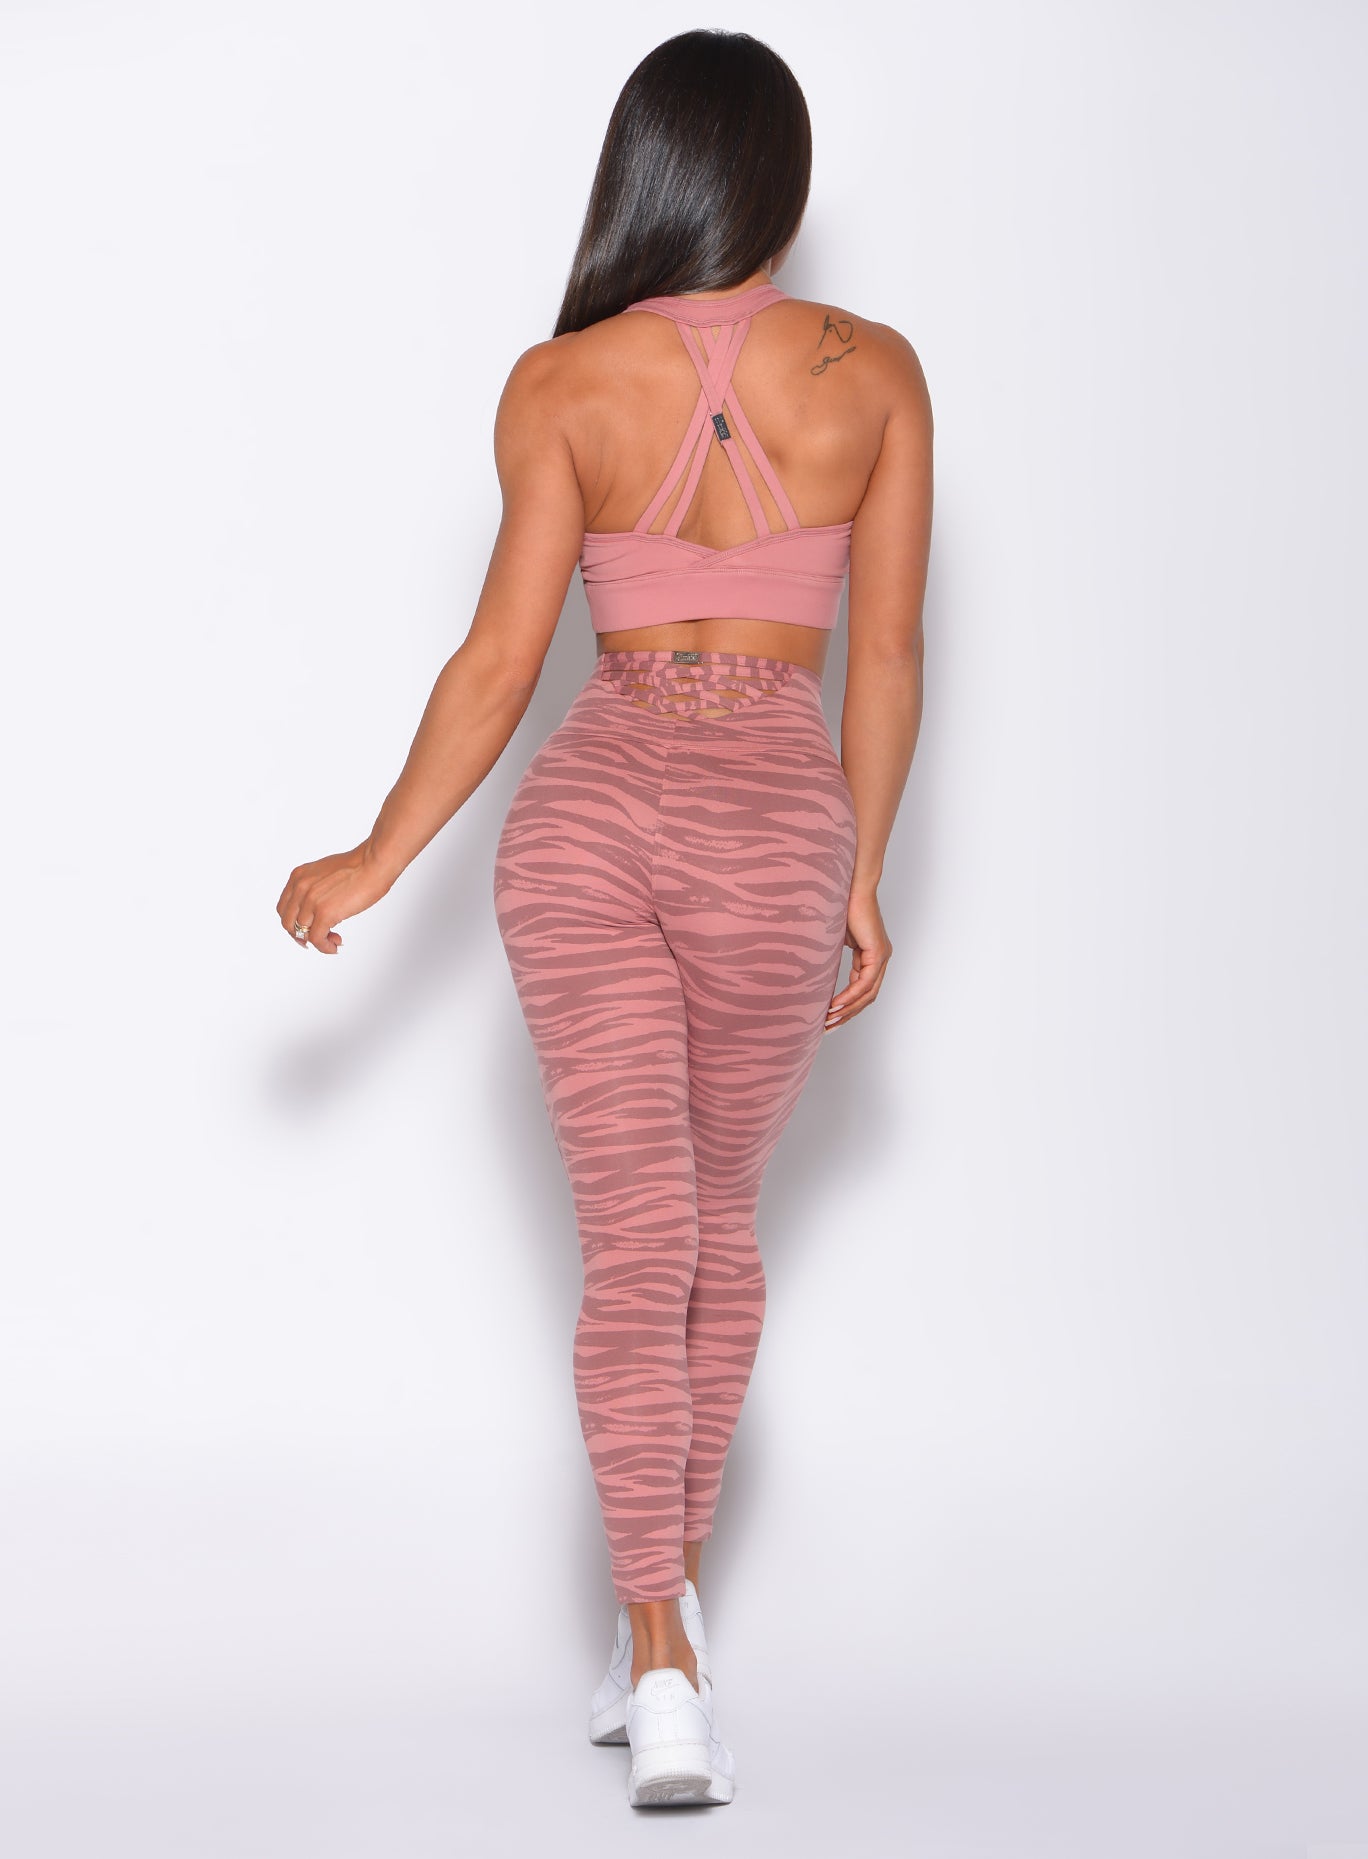 Back profile view of a model in our rival sports bra in solid blush color and a matching tiger print sexy back leggings